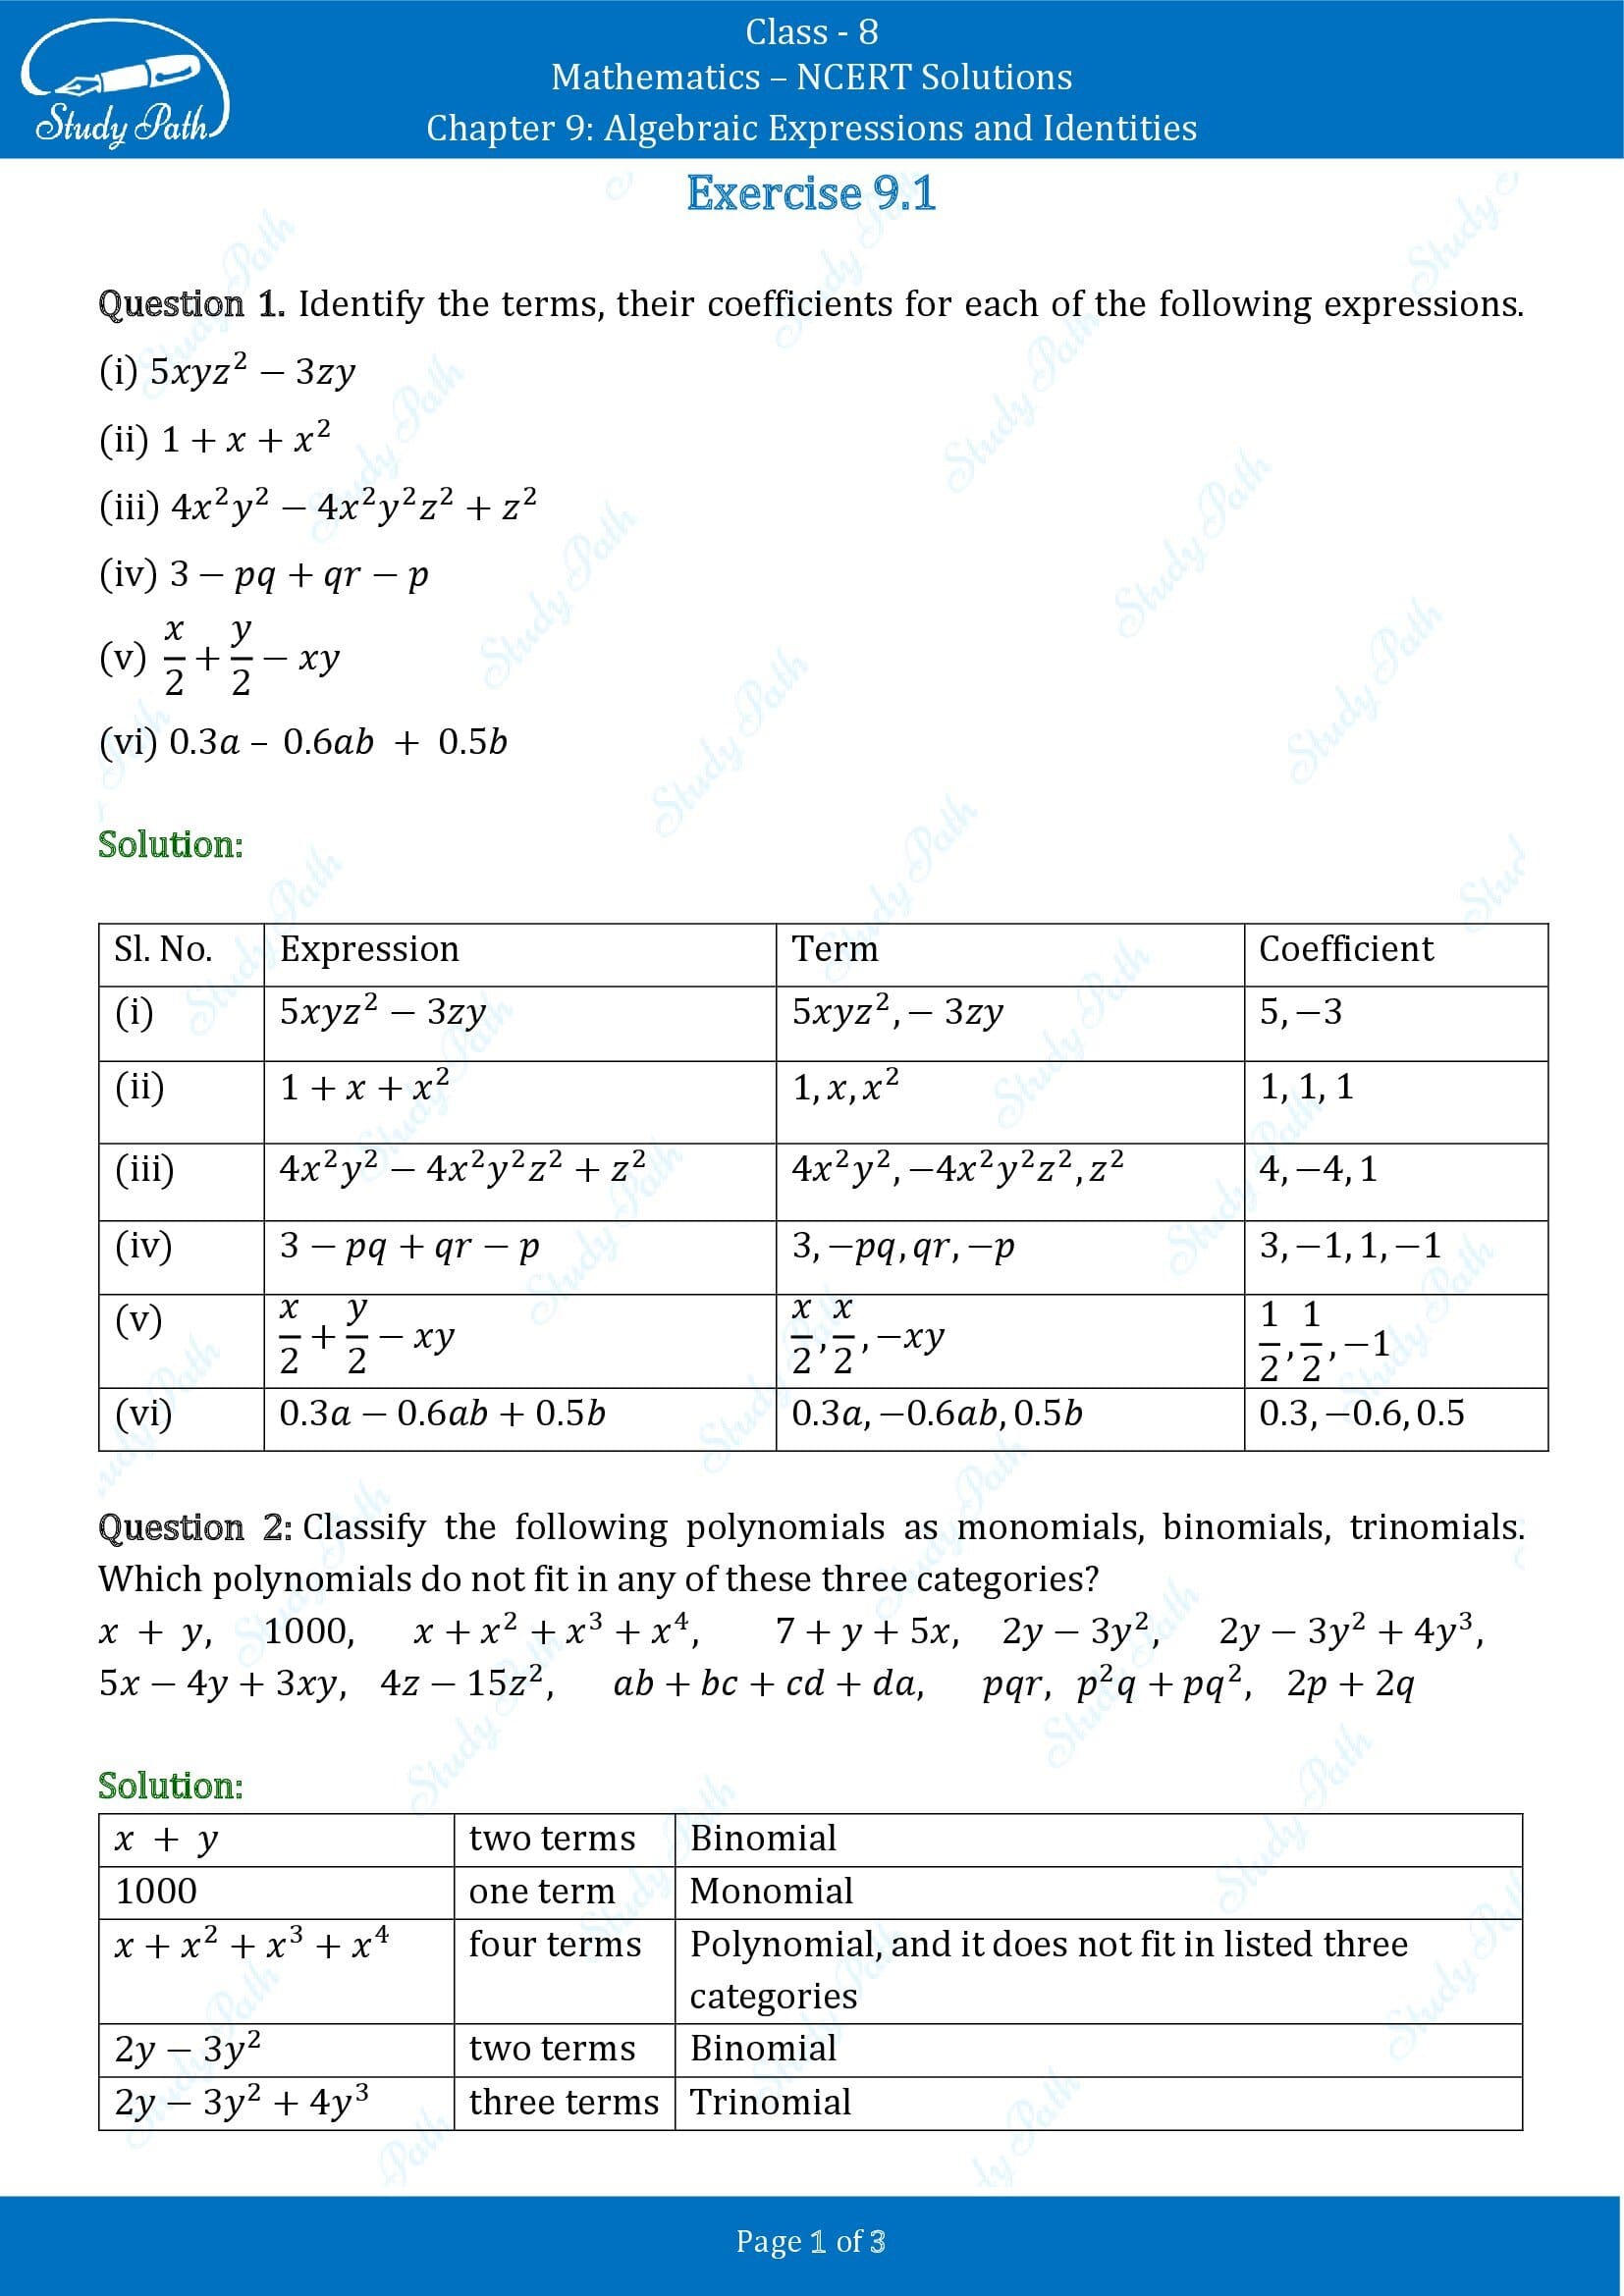 NCERT Solutions for Class 8 Maths Chapter 9 Algebraic Expressions and Identities Exercise 9.1 00001